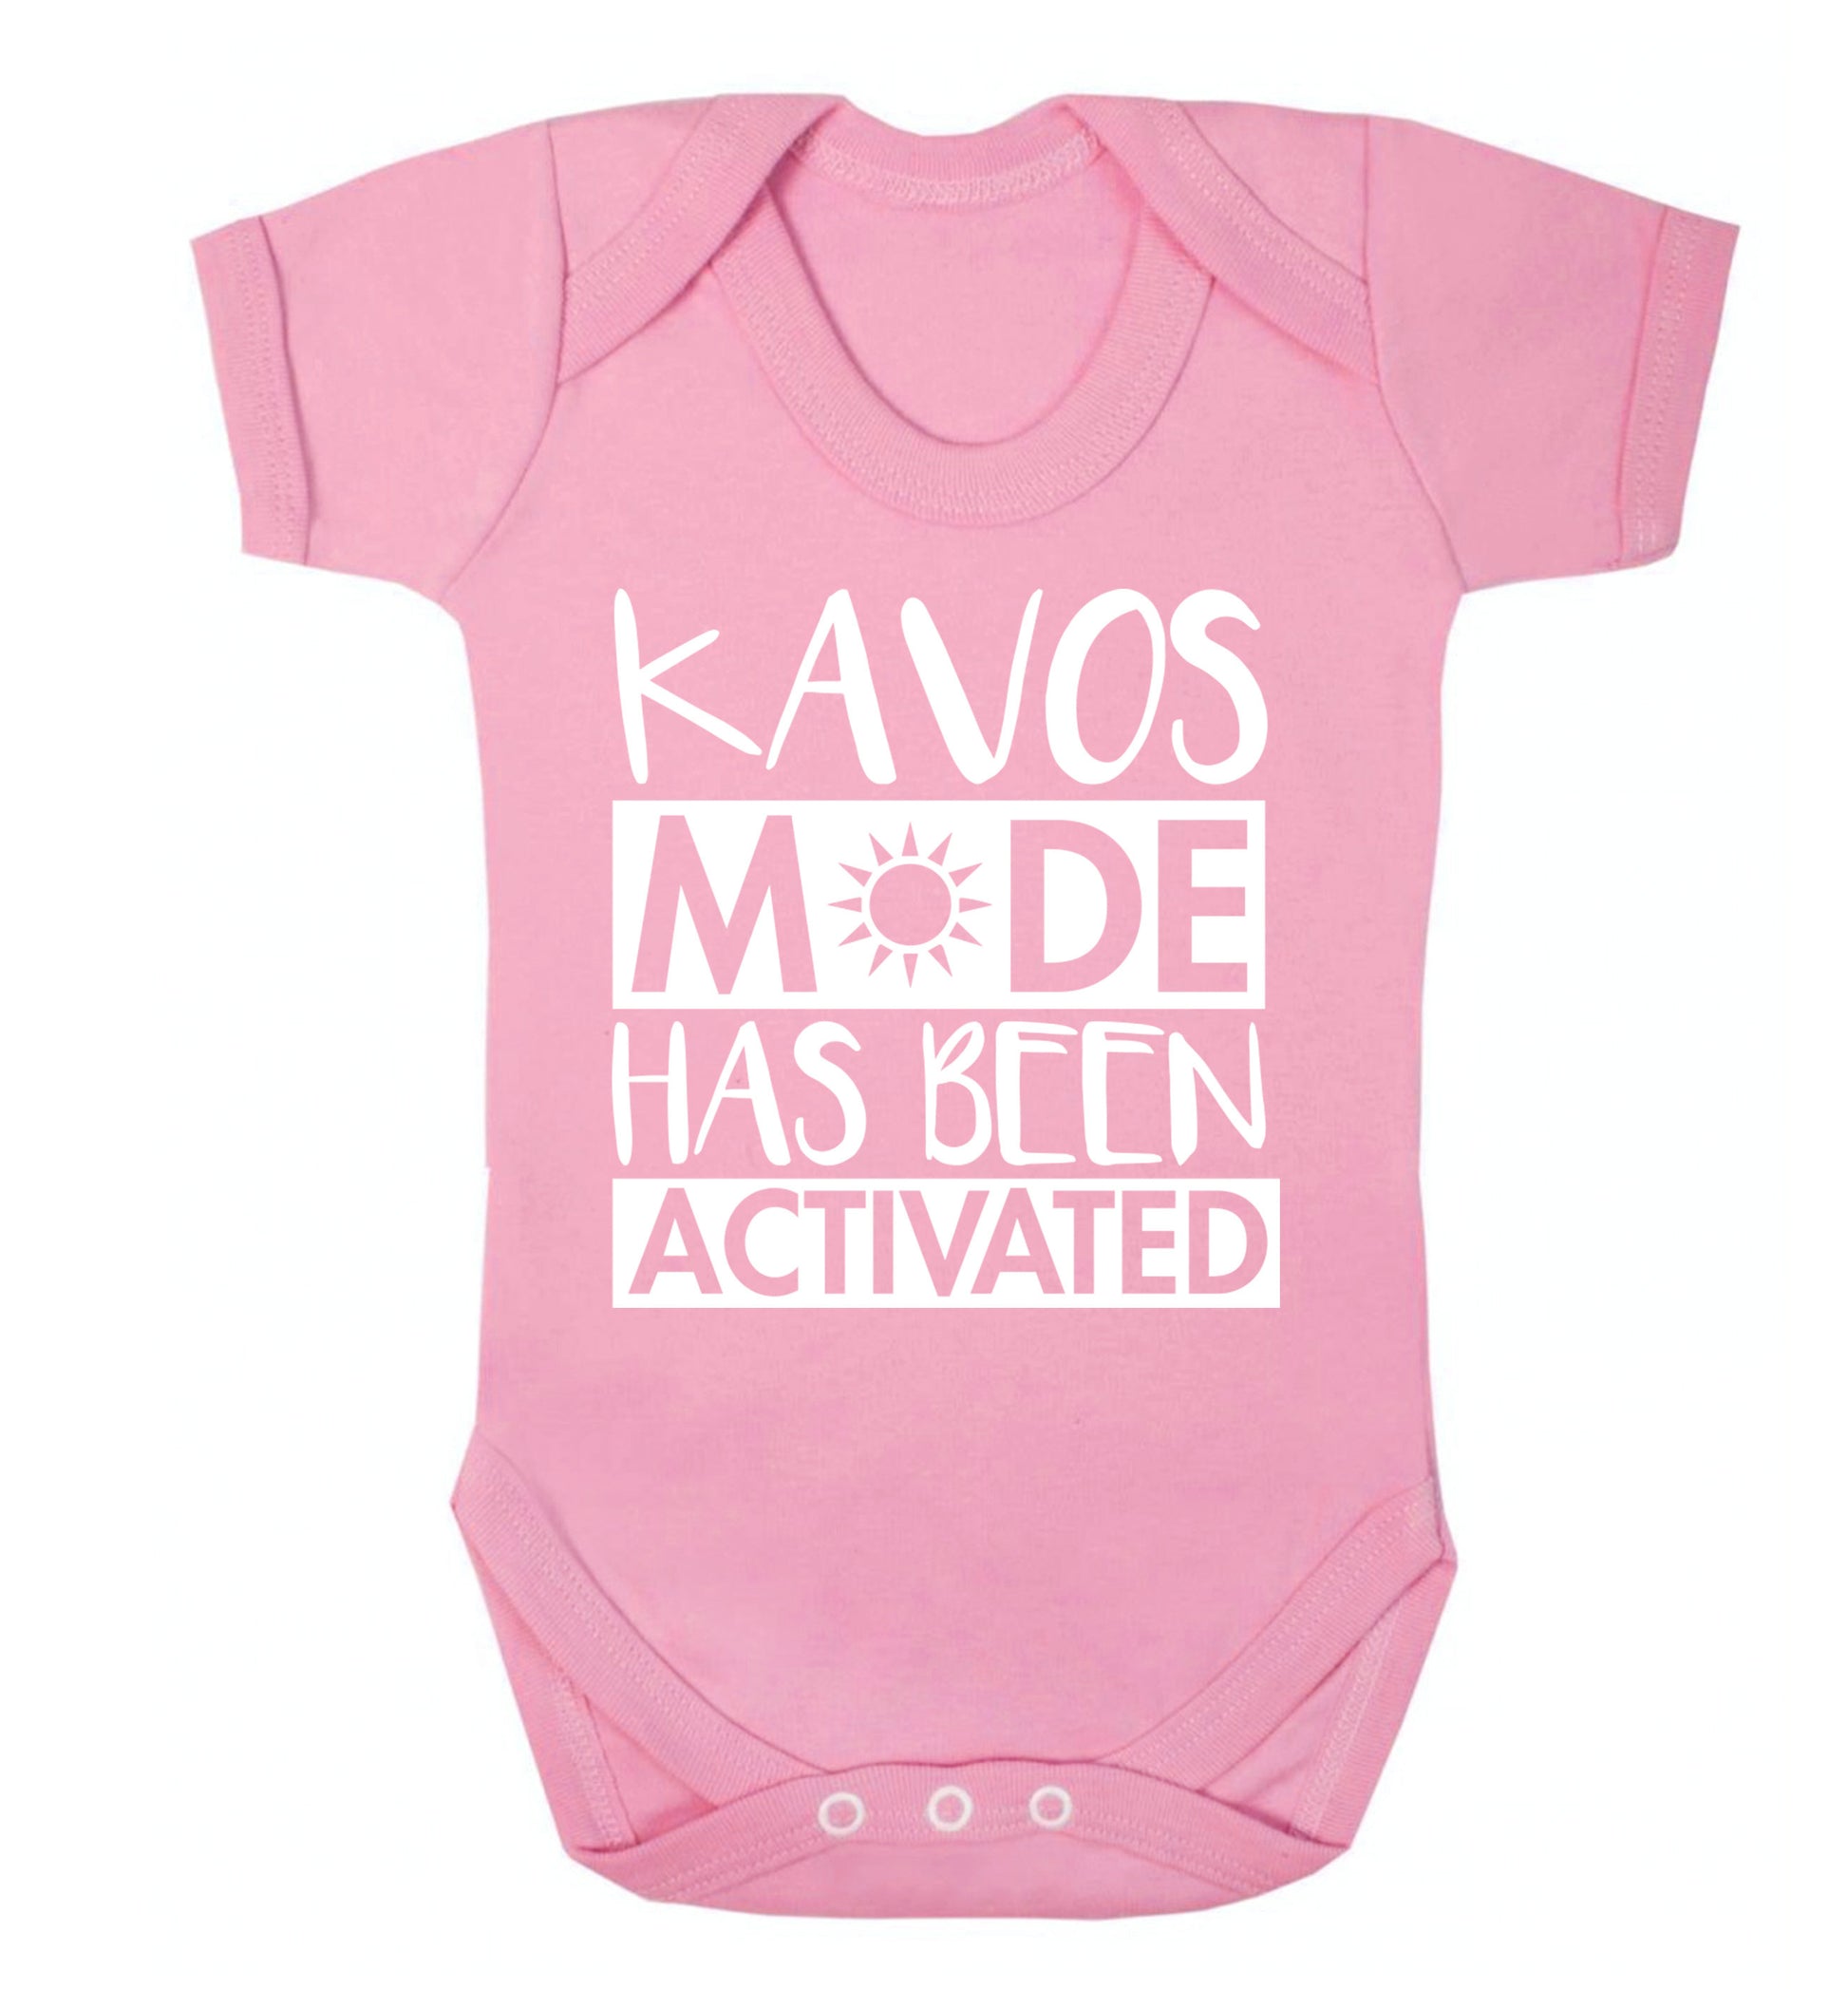 Kavos mode has been activated Baby Vest pale pink 18-24 months